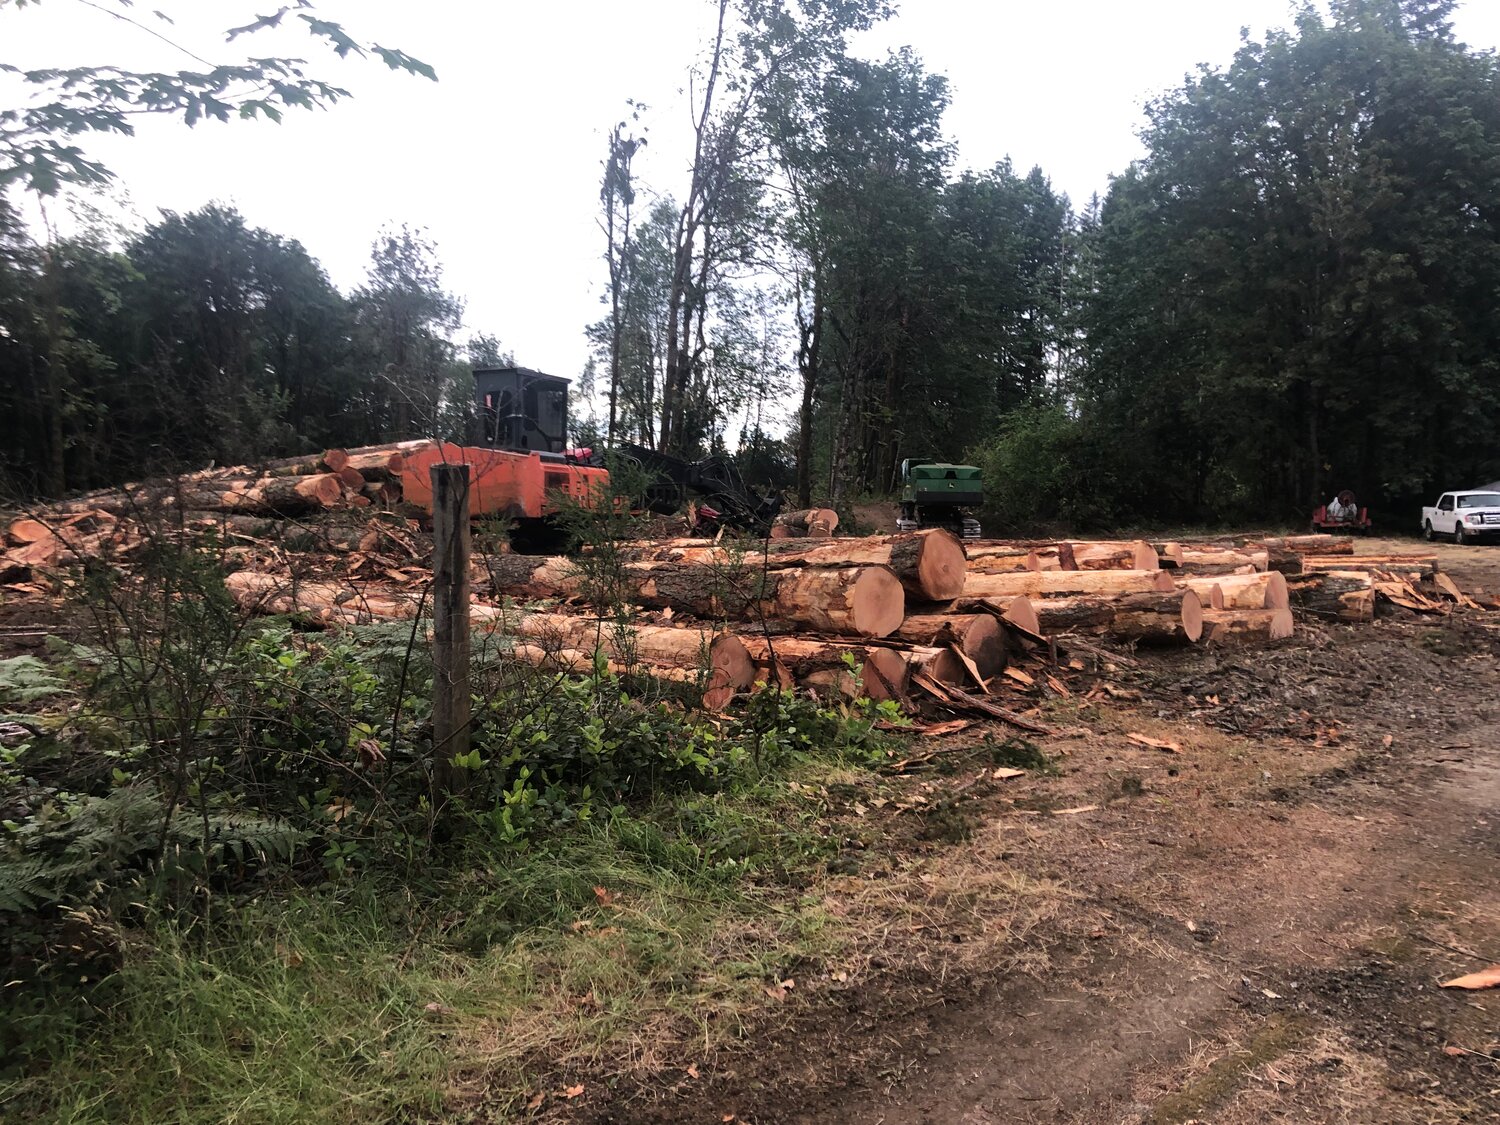 Logging in June 2022 and subsequent clearing of this previously forested area in Olympia made room for Scotch Broom, an invasive plant species. Photo taken June 5, 2022.